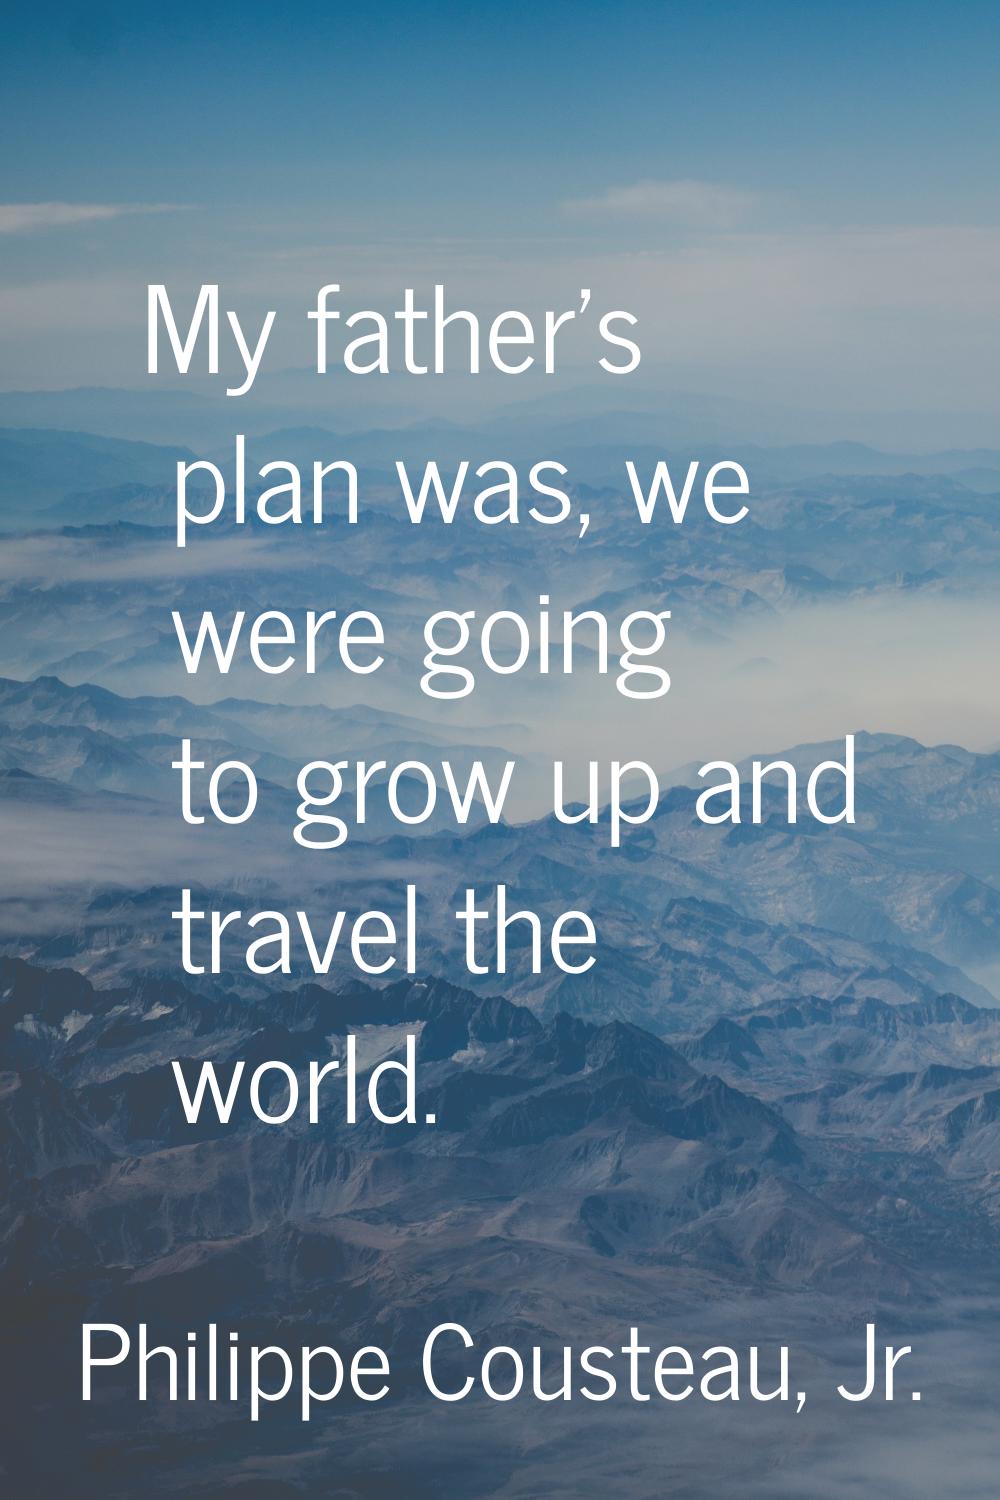 My father's plan was, we were going to grow up and travel the world.